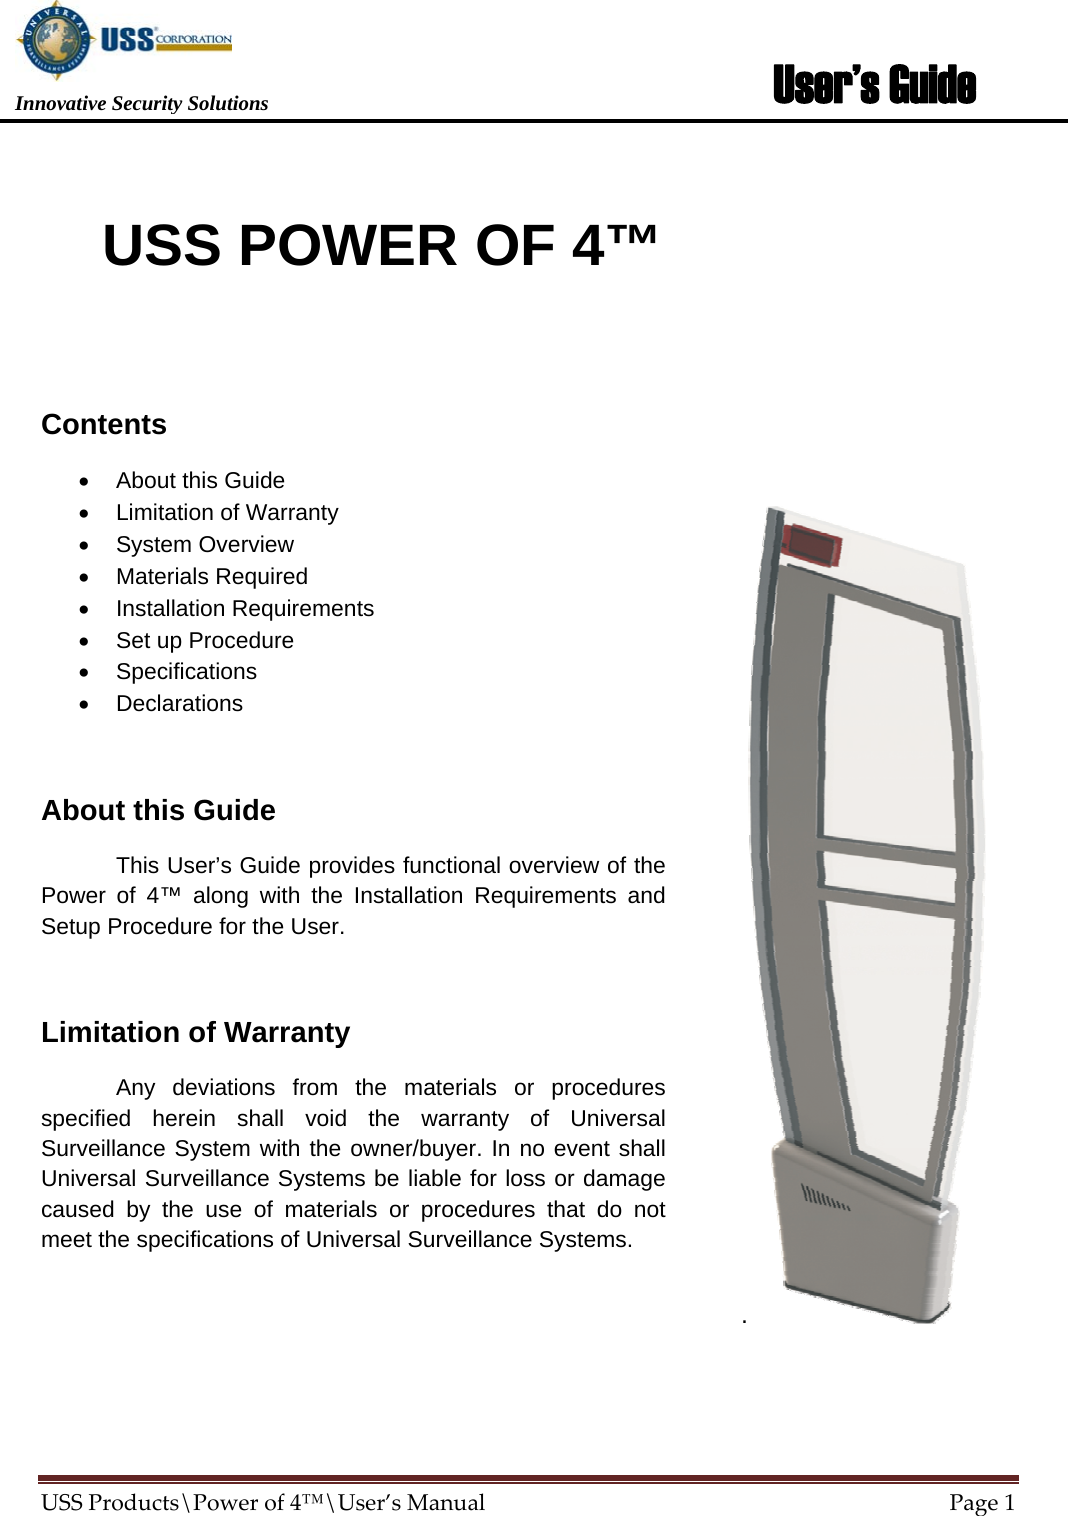                        USS POWER OF 4™  Contents •  About this Guide •  Limitation of Warranty • System Overview • Materials Required • Installation Requirements •  Set up Procedure • Specifications • Declarations  About this Guide   This User’s Guide provides functional overview of the Power of 4™ along with the Installation Requirements and Setup Procedure for the User.  Limitation of Warranty   Any deviations from the materials or procedures specified herein shall void the warranty of Universal Surveillance System with the owner/buyer. In no event shall Universal Surveillance Systems be liable for loss or damage caused by the use of materials or procedures that do not meet the specifications of Universal Surveillance Systems.                             Innovative Security Solutions  User’s Guide           .  USSProducts\Powerof4™\User’sManualPage1